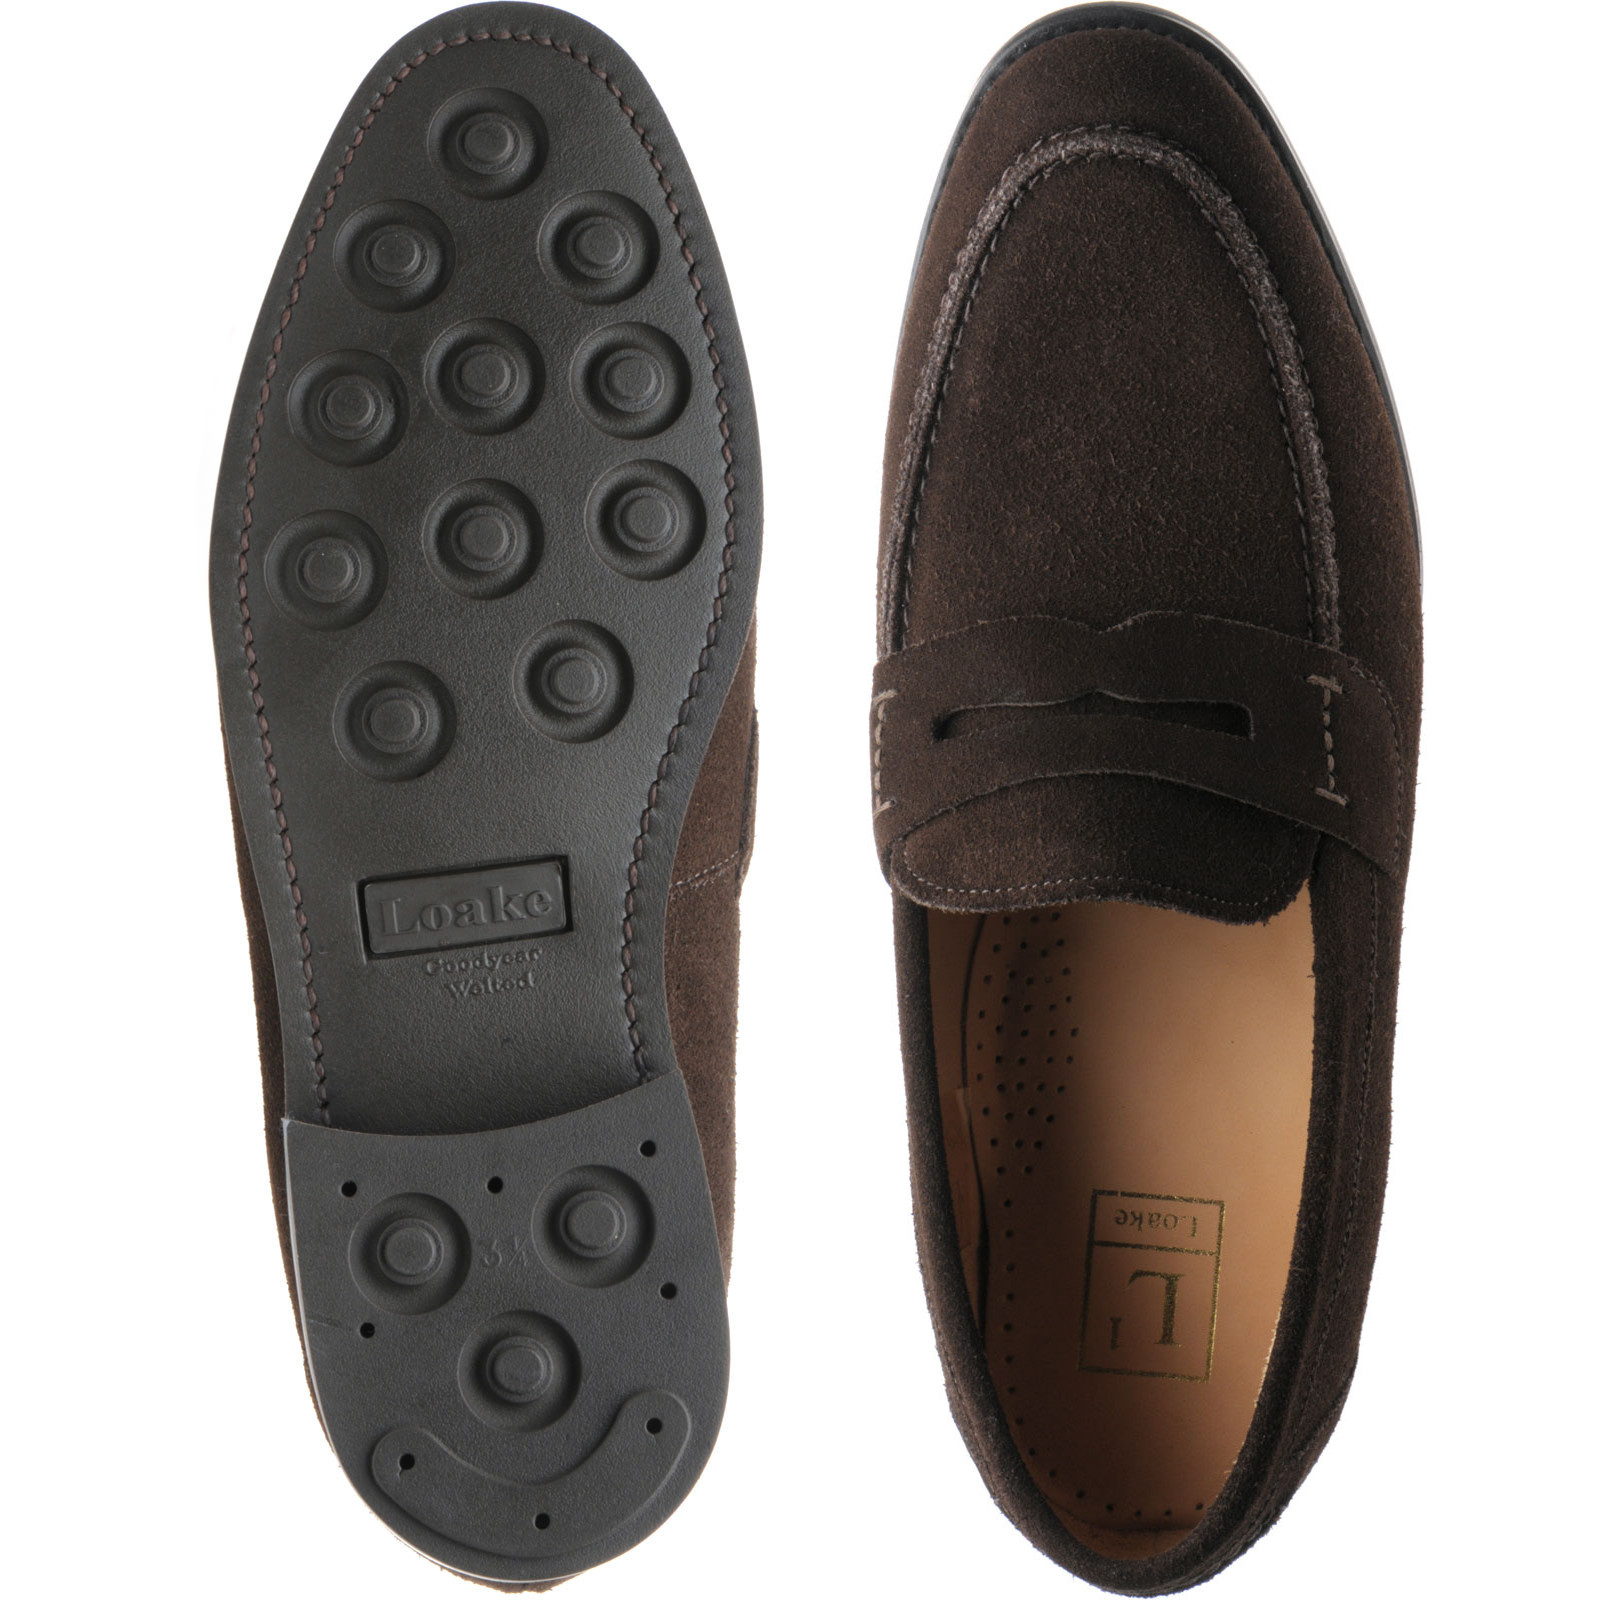 Loake shoes | Loake Professional | 356 in Dark Brown Suede at Herring Shoes